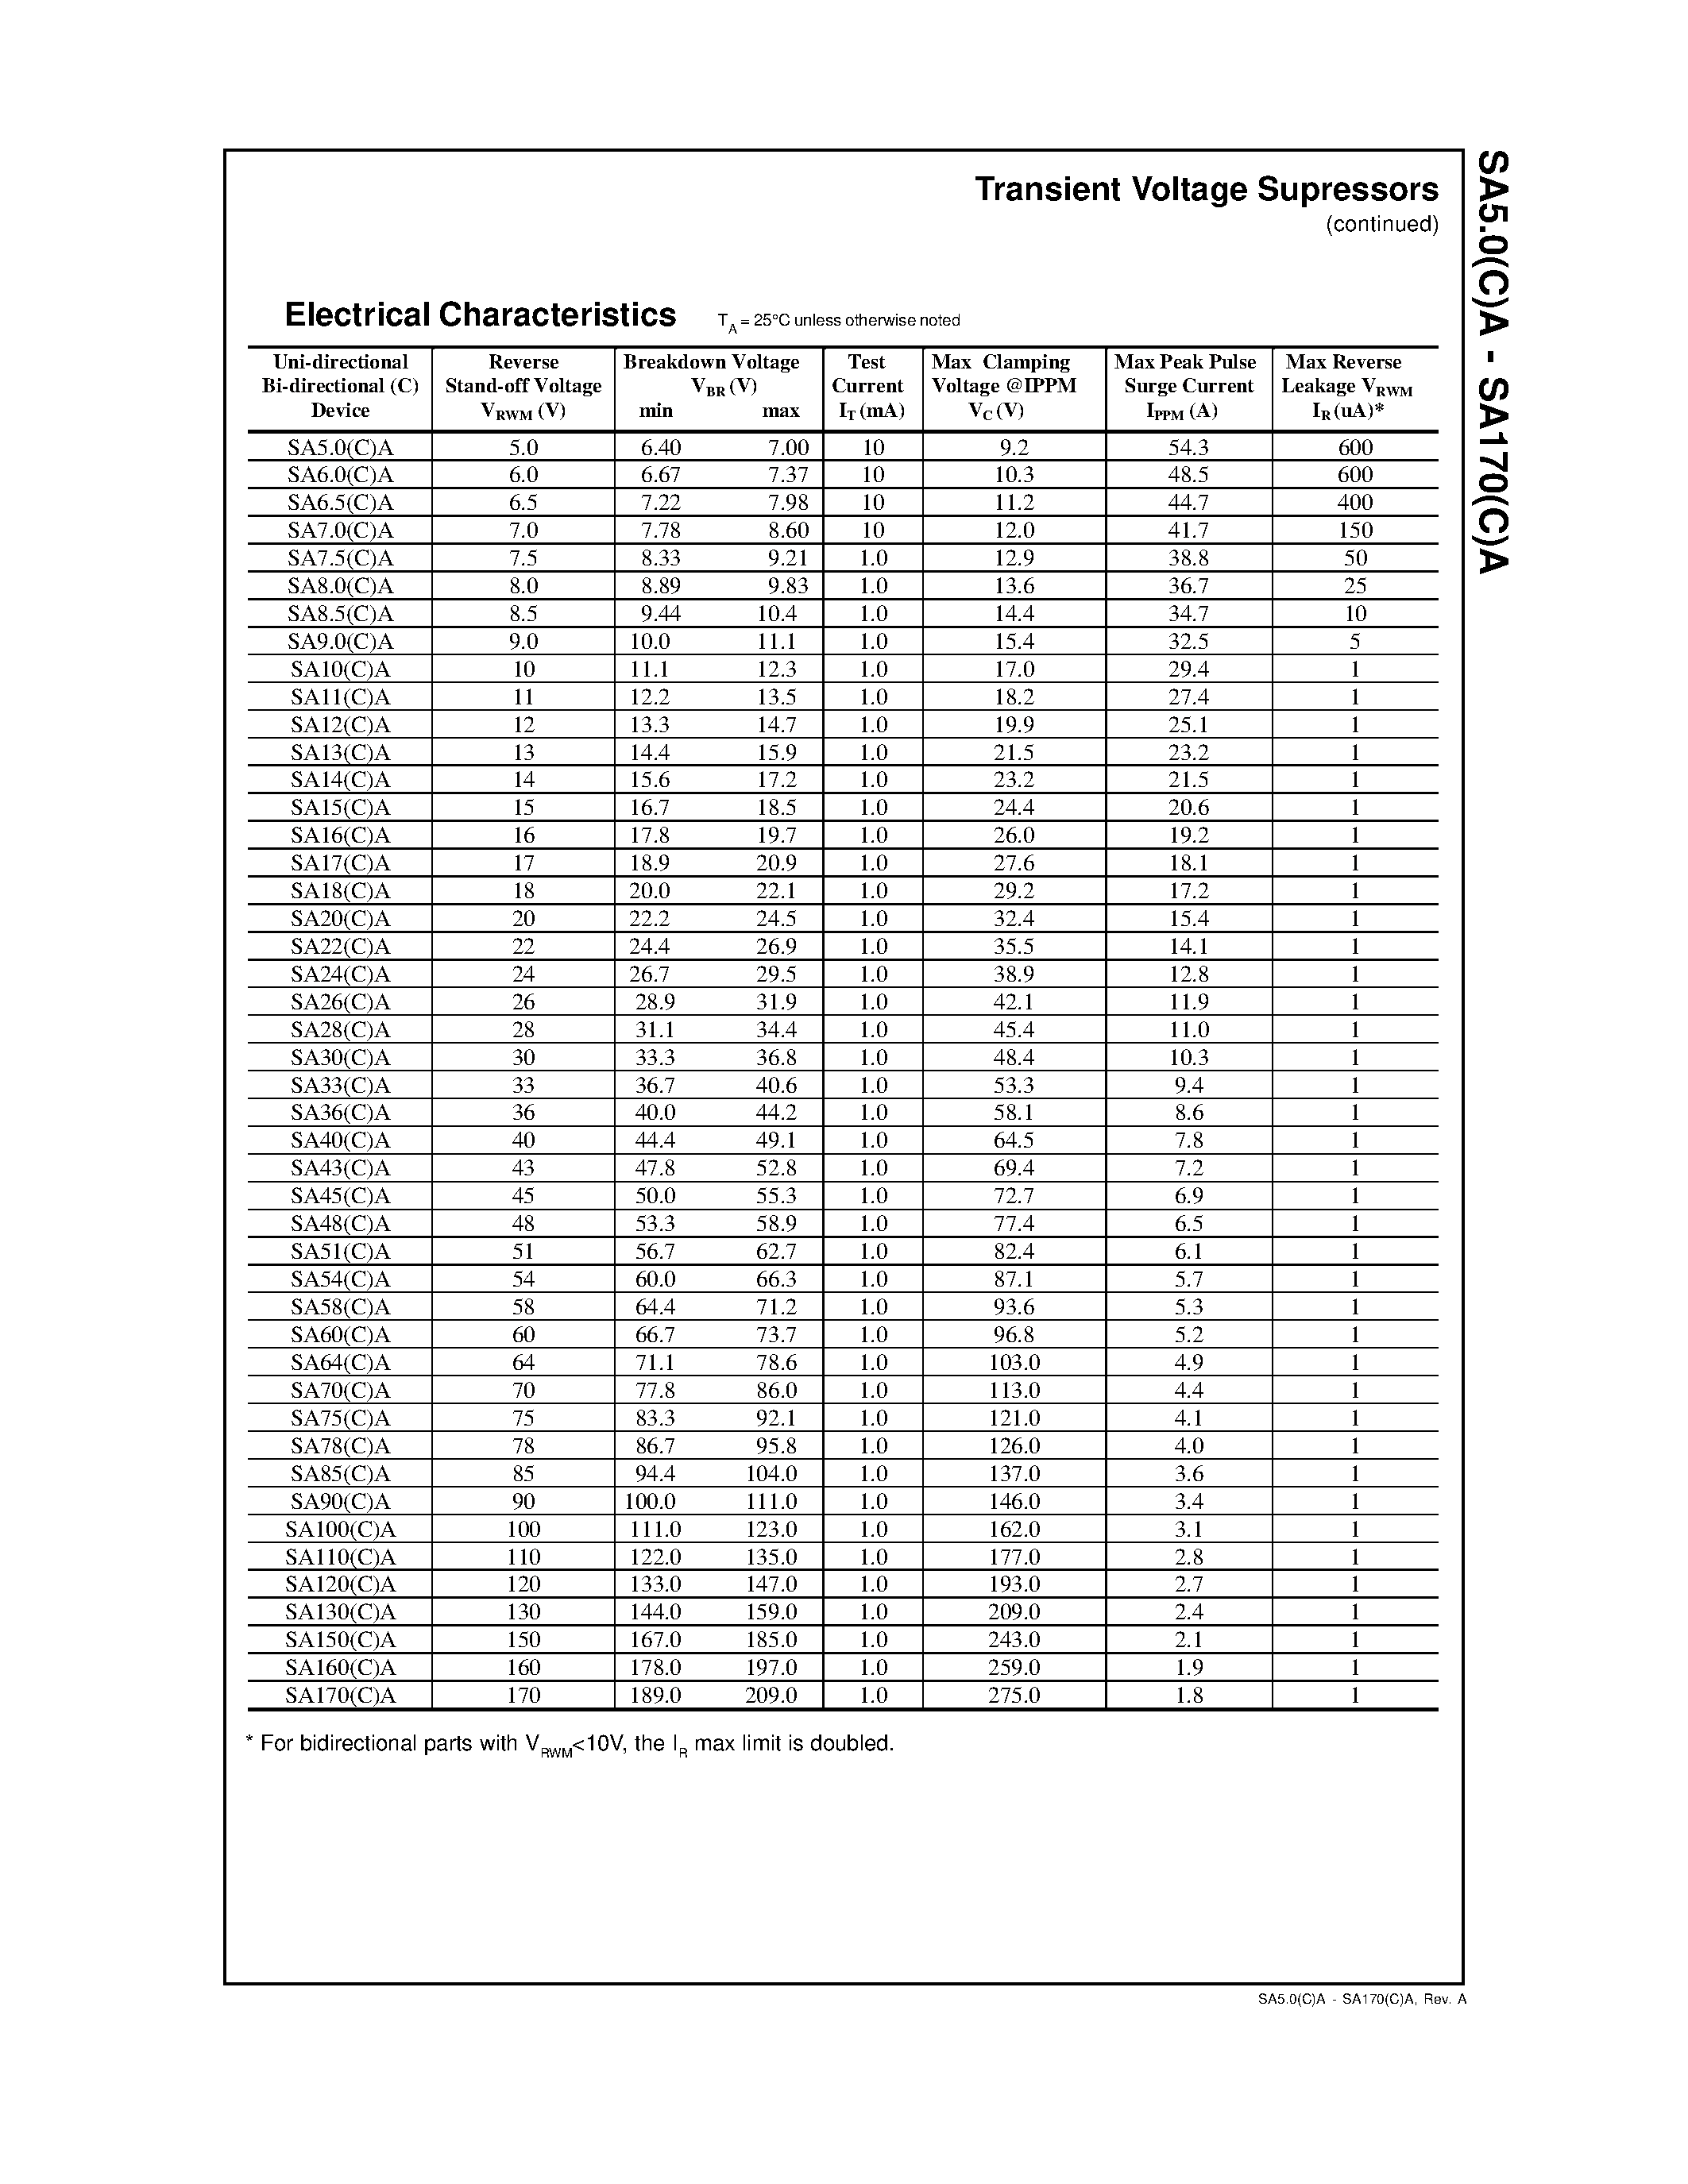 Datasheet SA36(C)A - DEVICES FOR BIPOLAR APPLICATIONS page 2